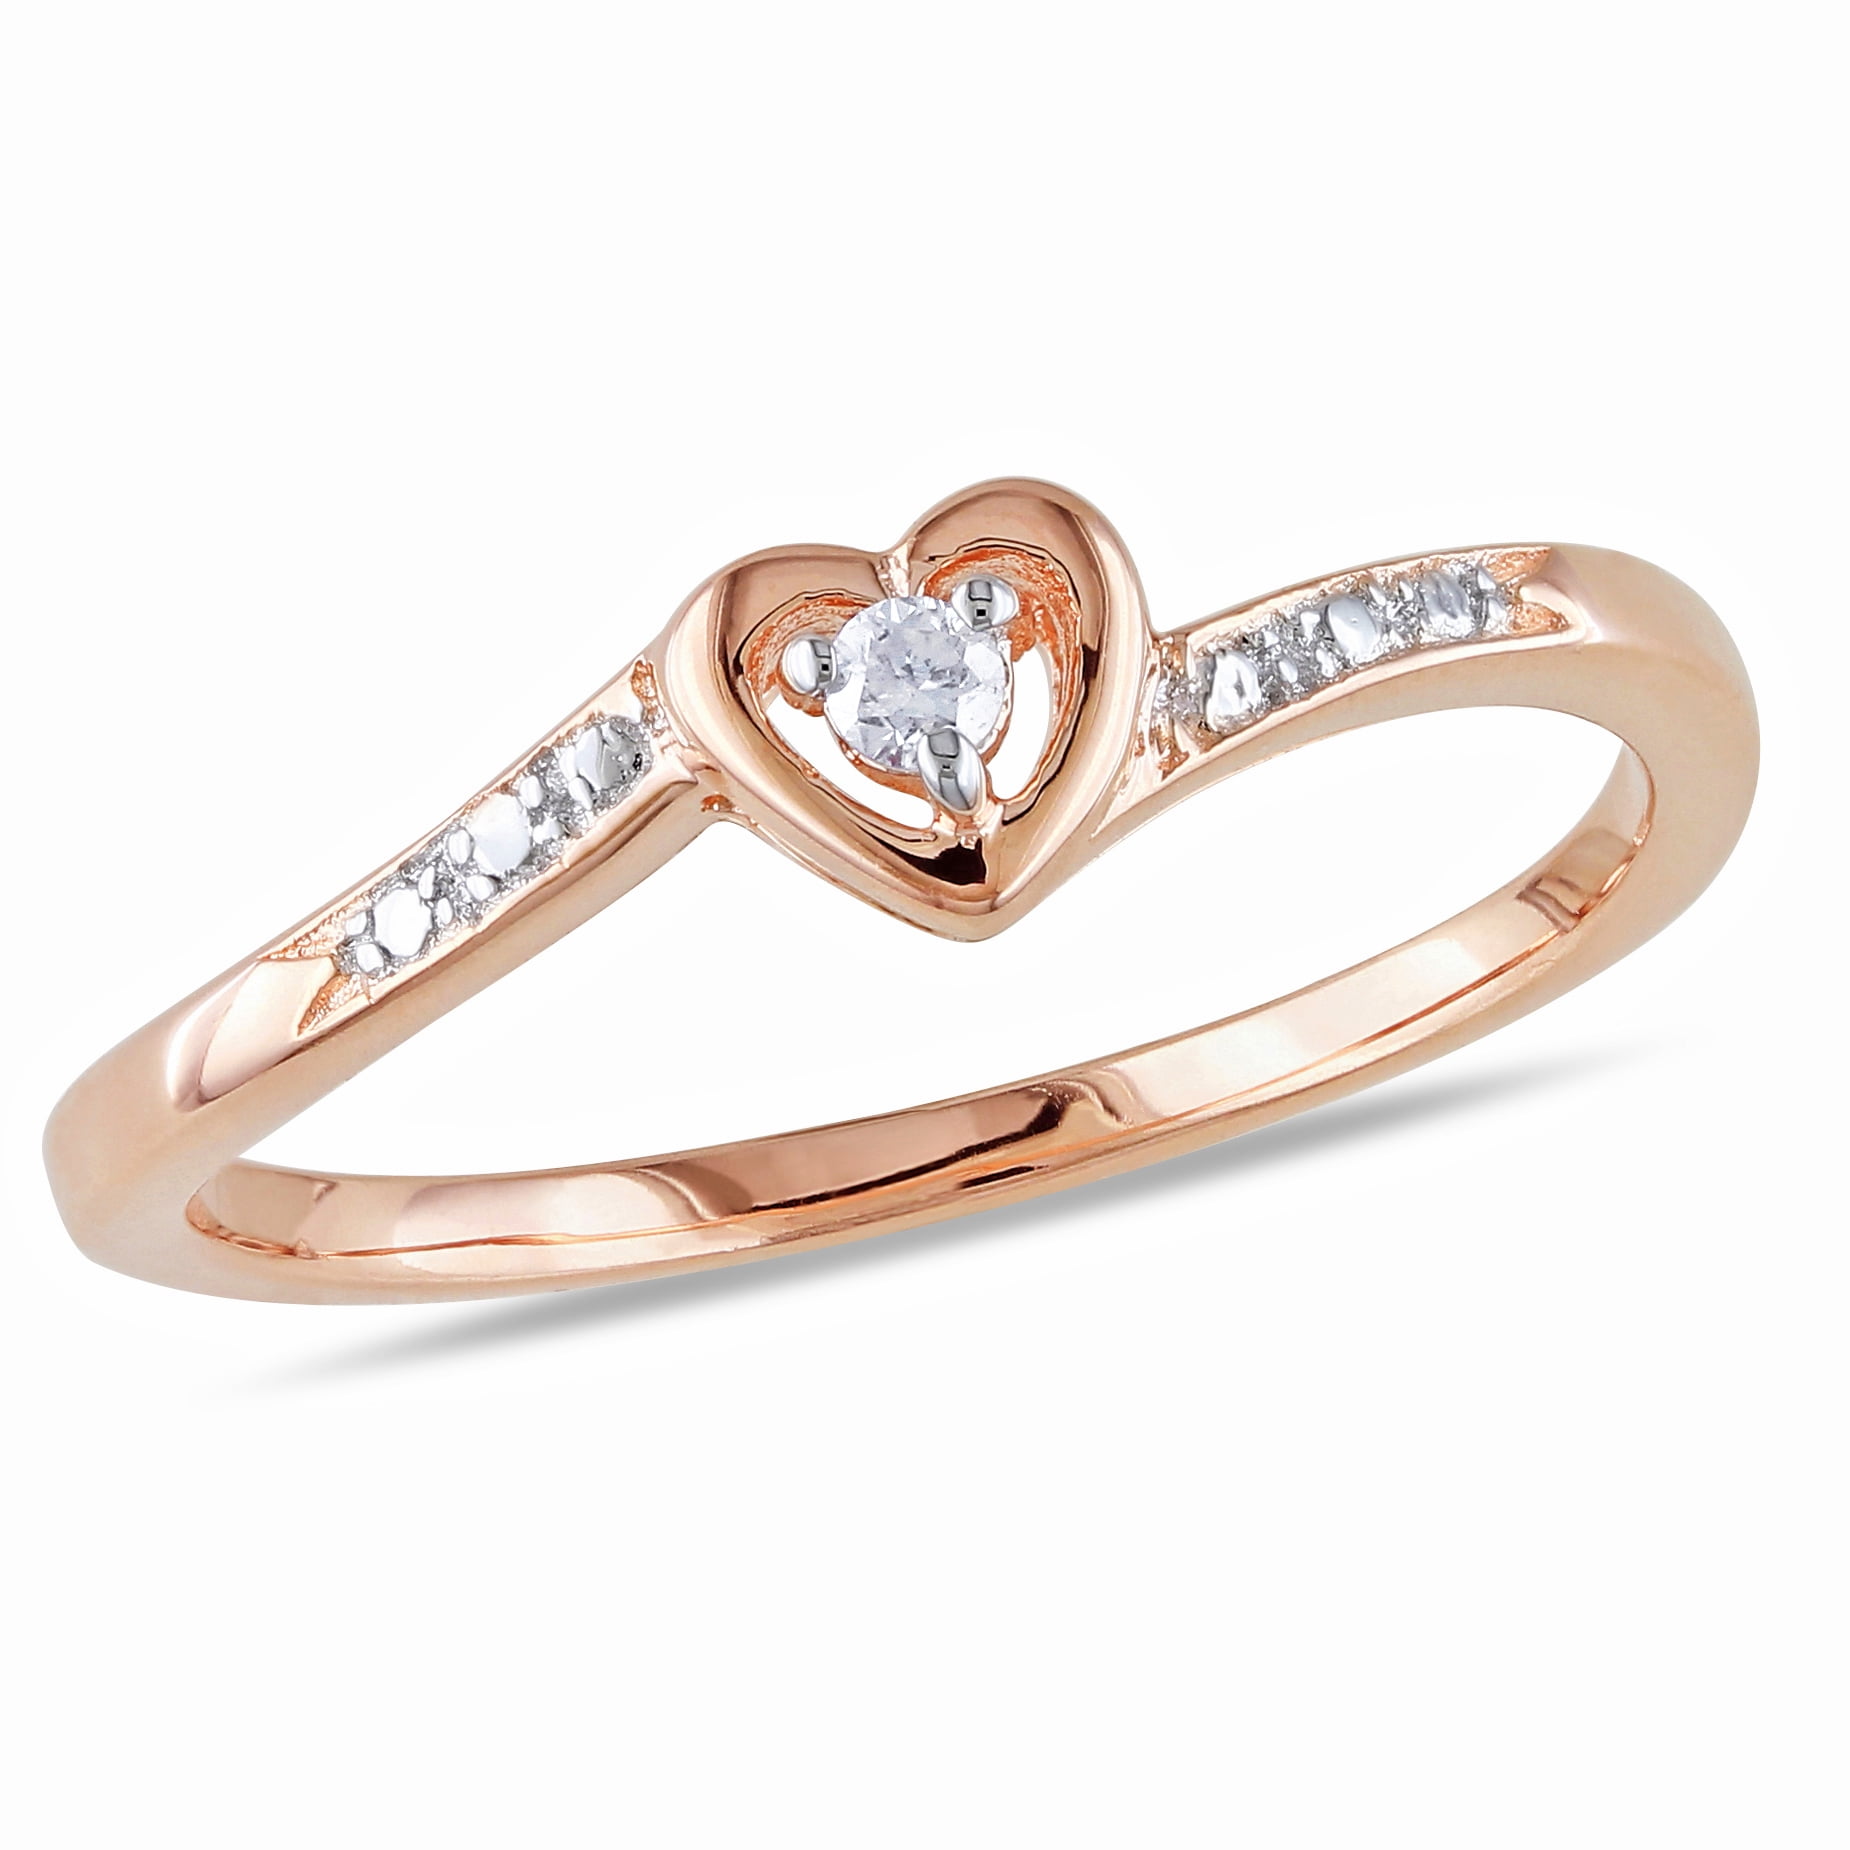 Buy For Less Rhodium and Rose Gold-Tone Plated 925 Sterling Silver Chevron Heart Ring